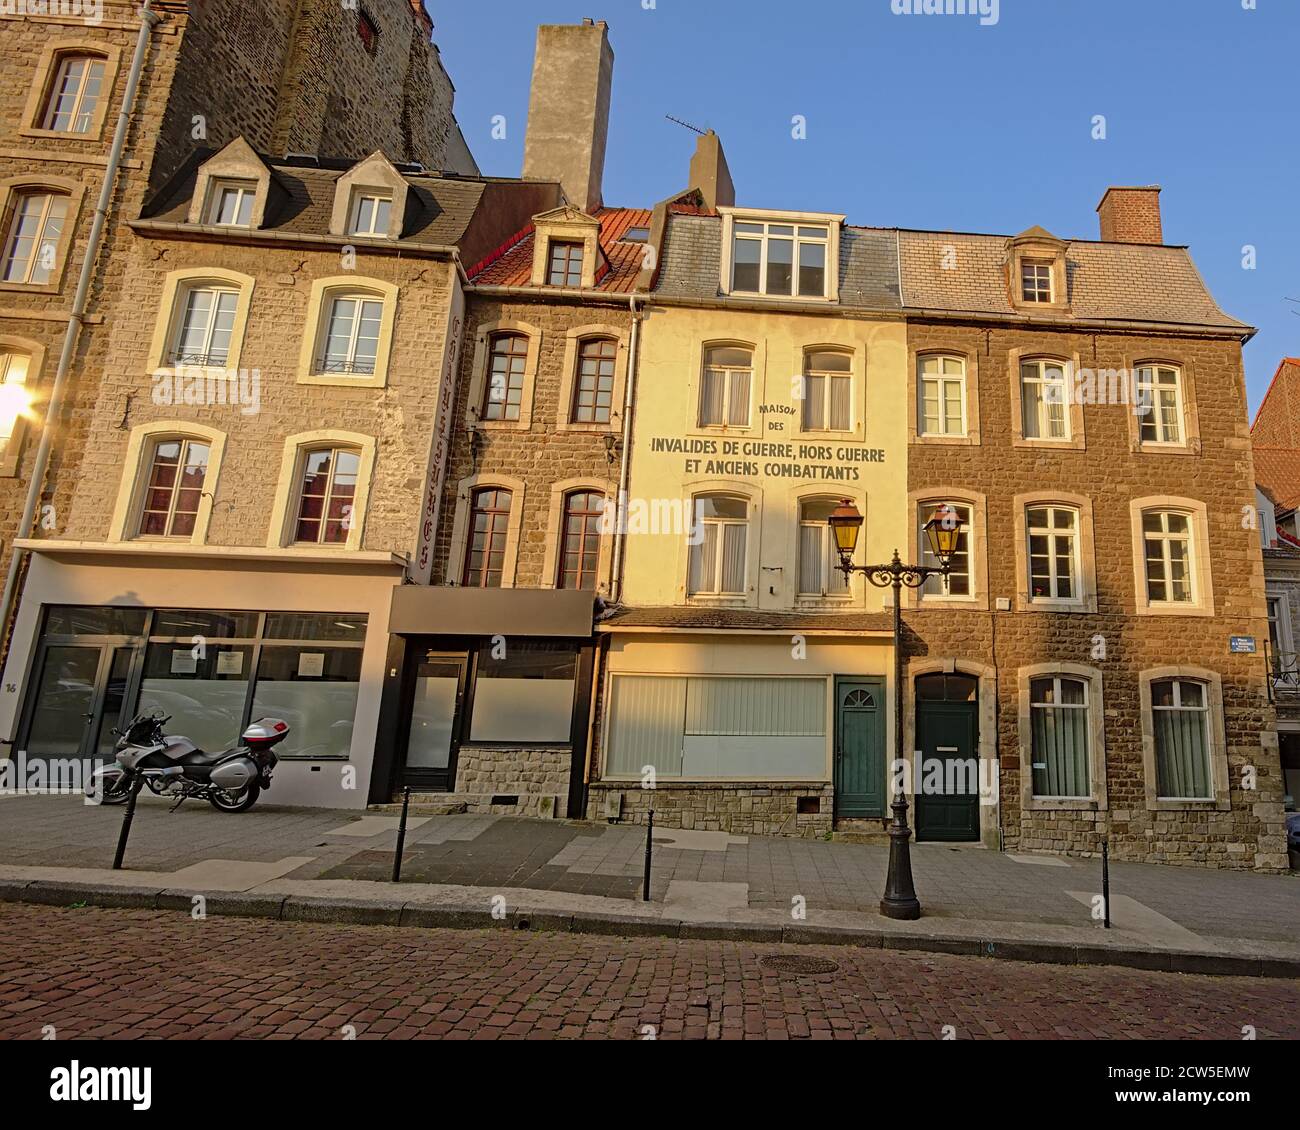 Old houses in the City center of Boulogne sur Mer, France, view from above from the city walls. Stock Photo